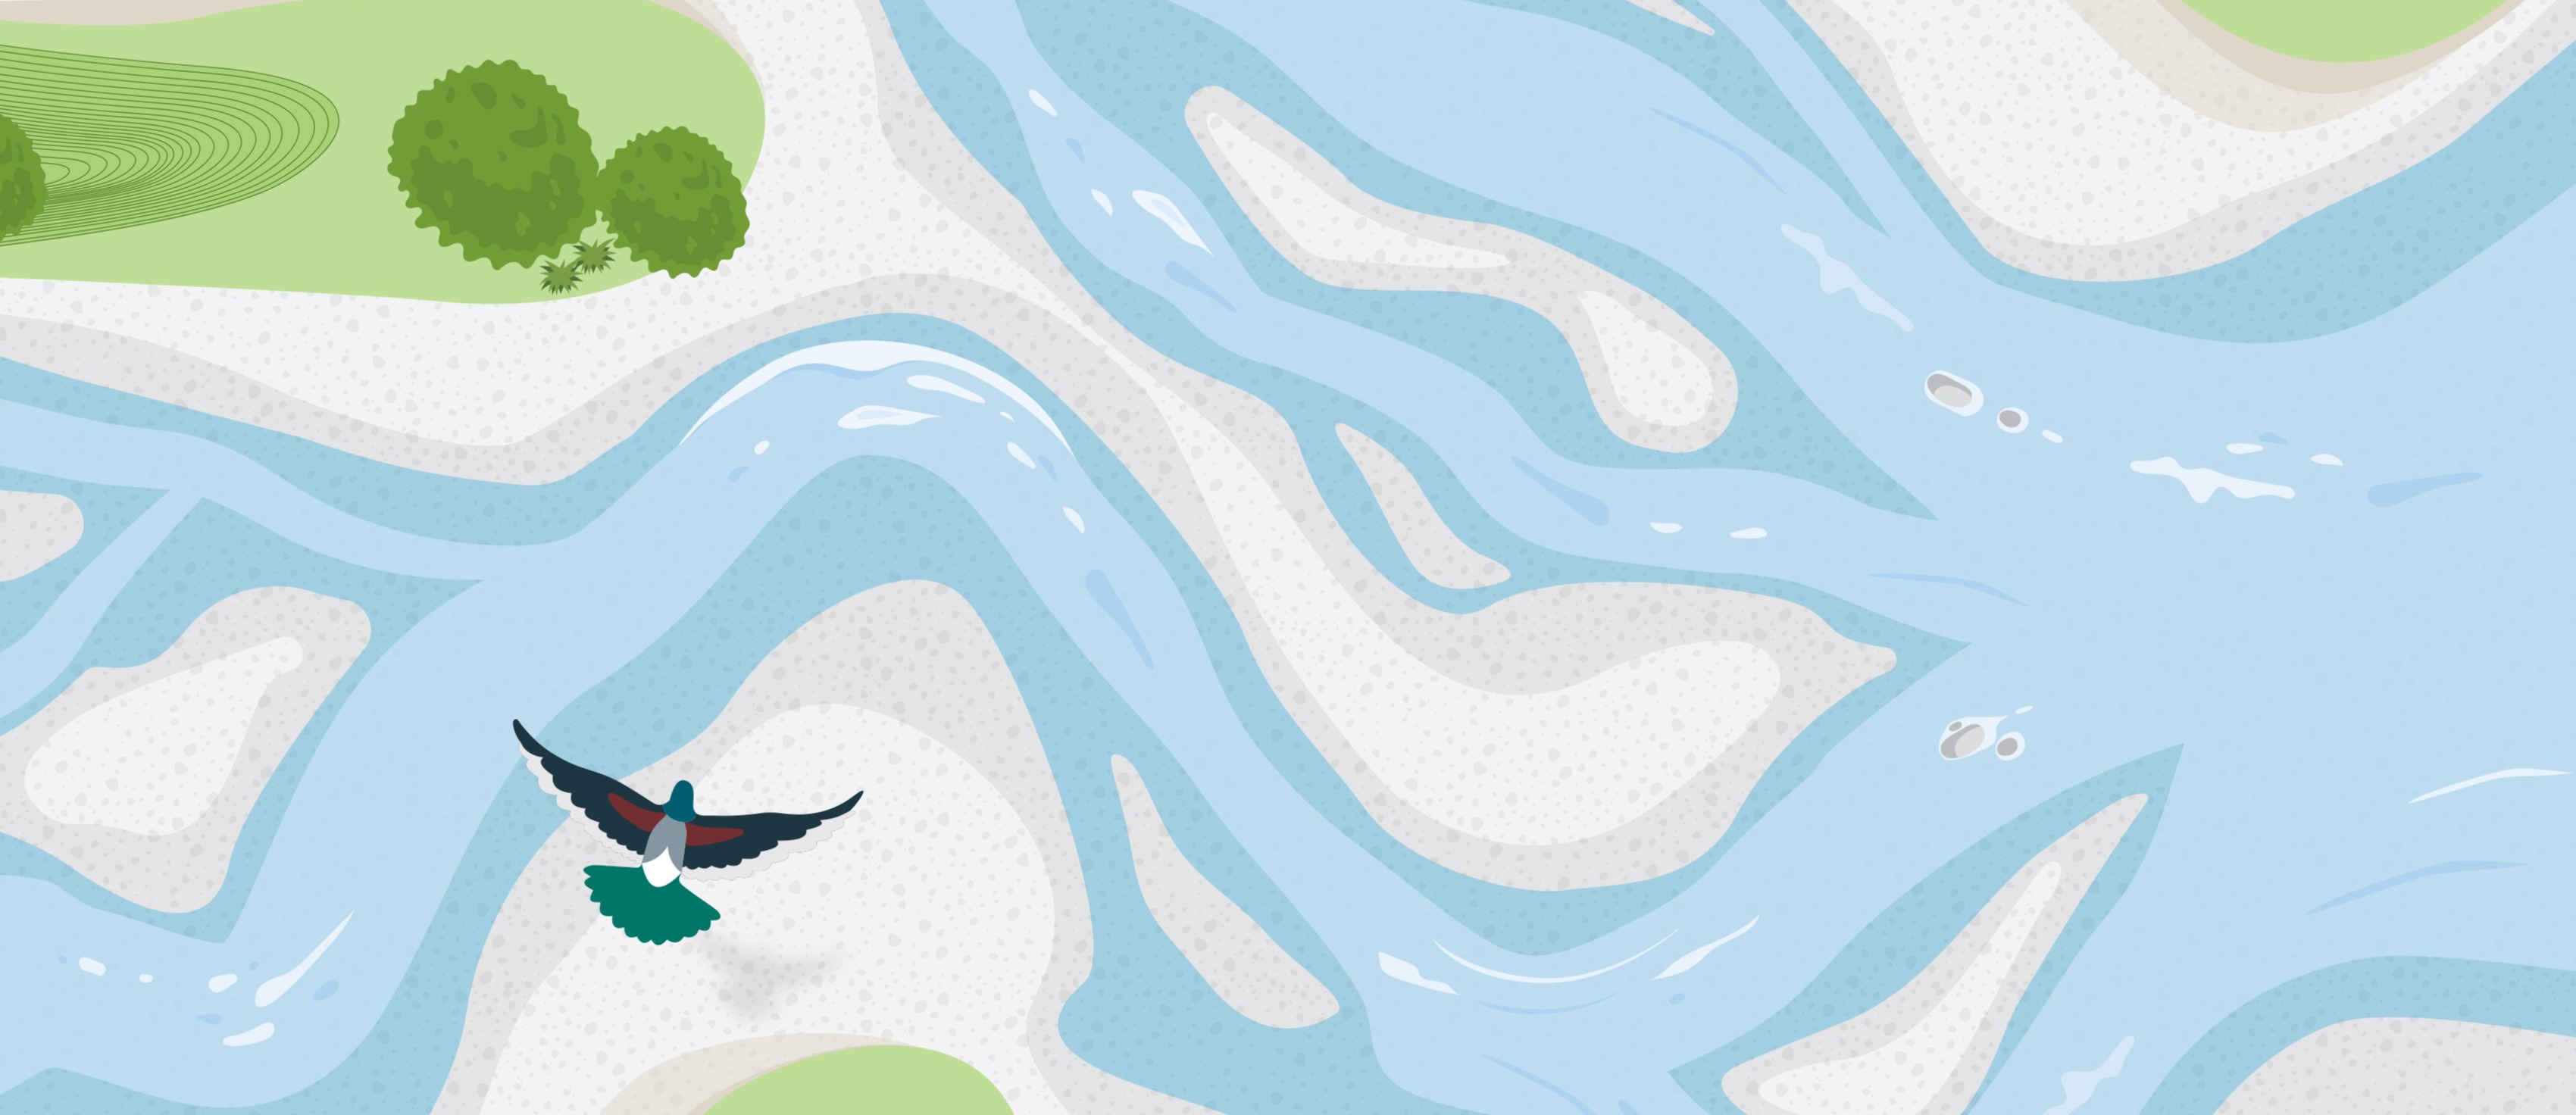 Graphic illustration of a braided river